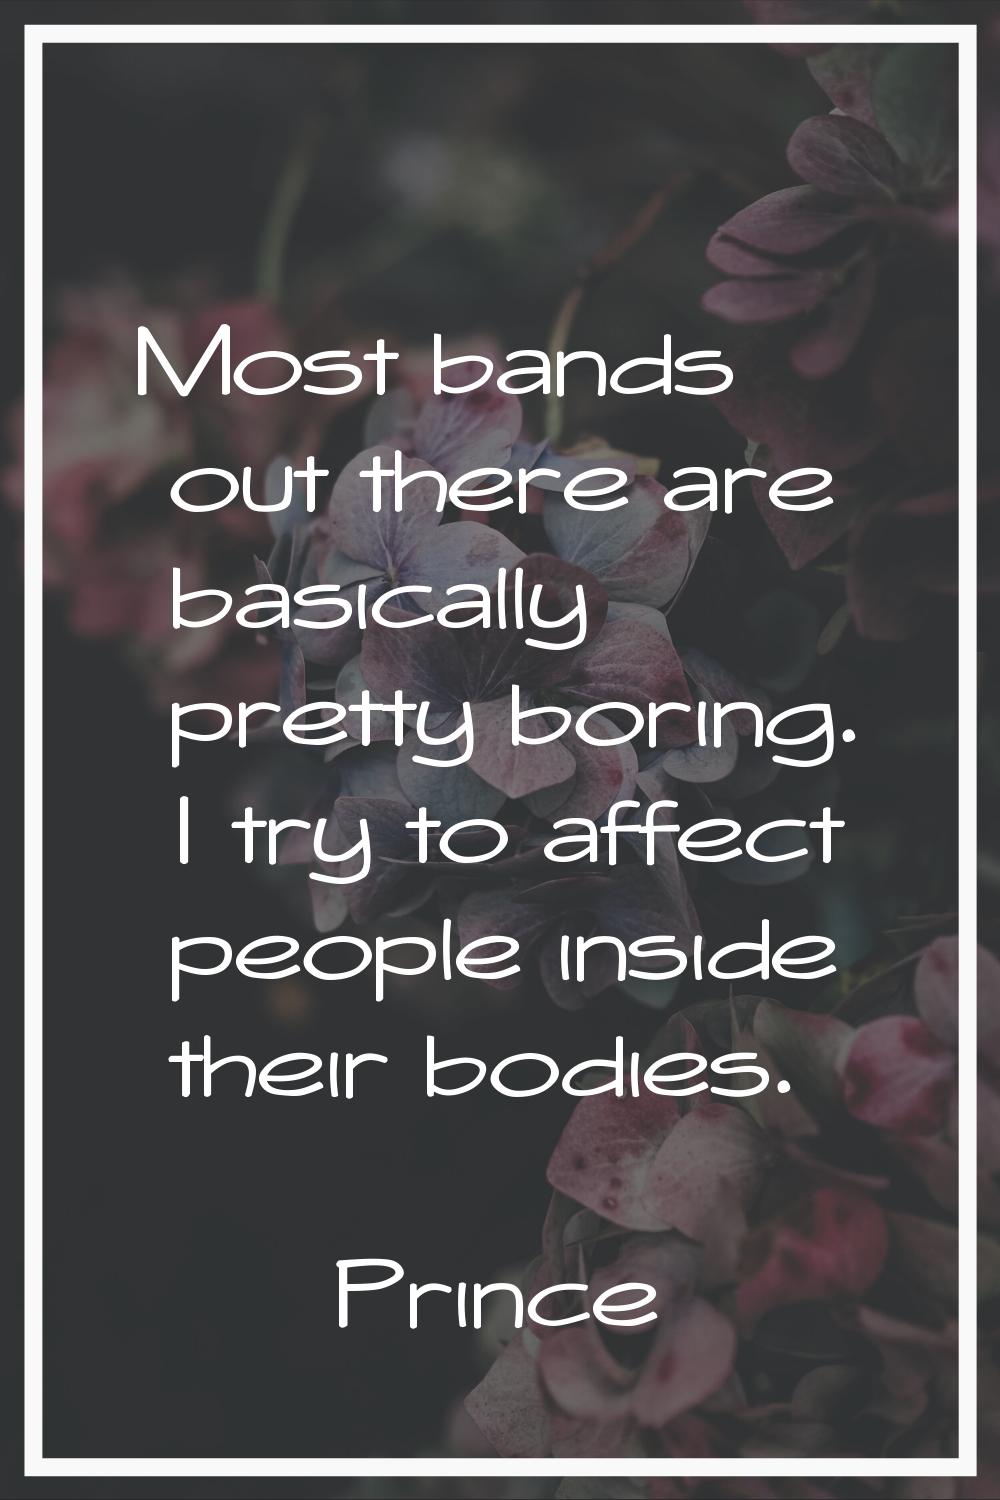 Most bands out there are basically pretty boring. I try to affect people inside their bodies.